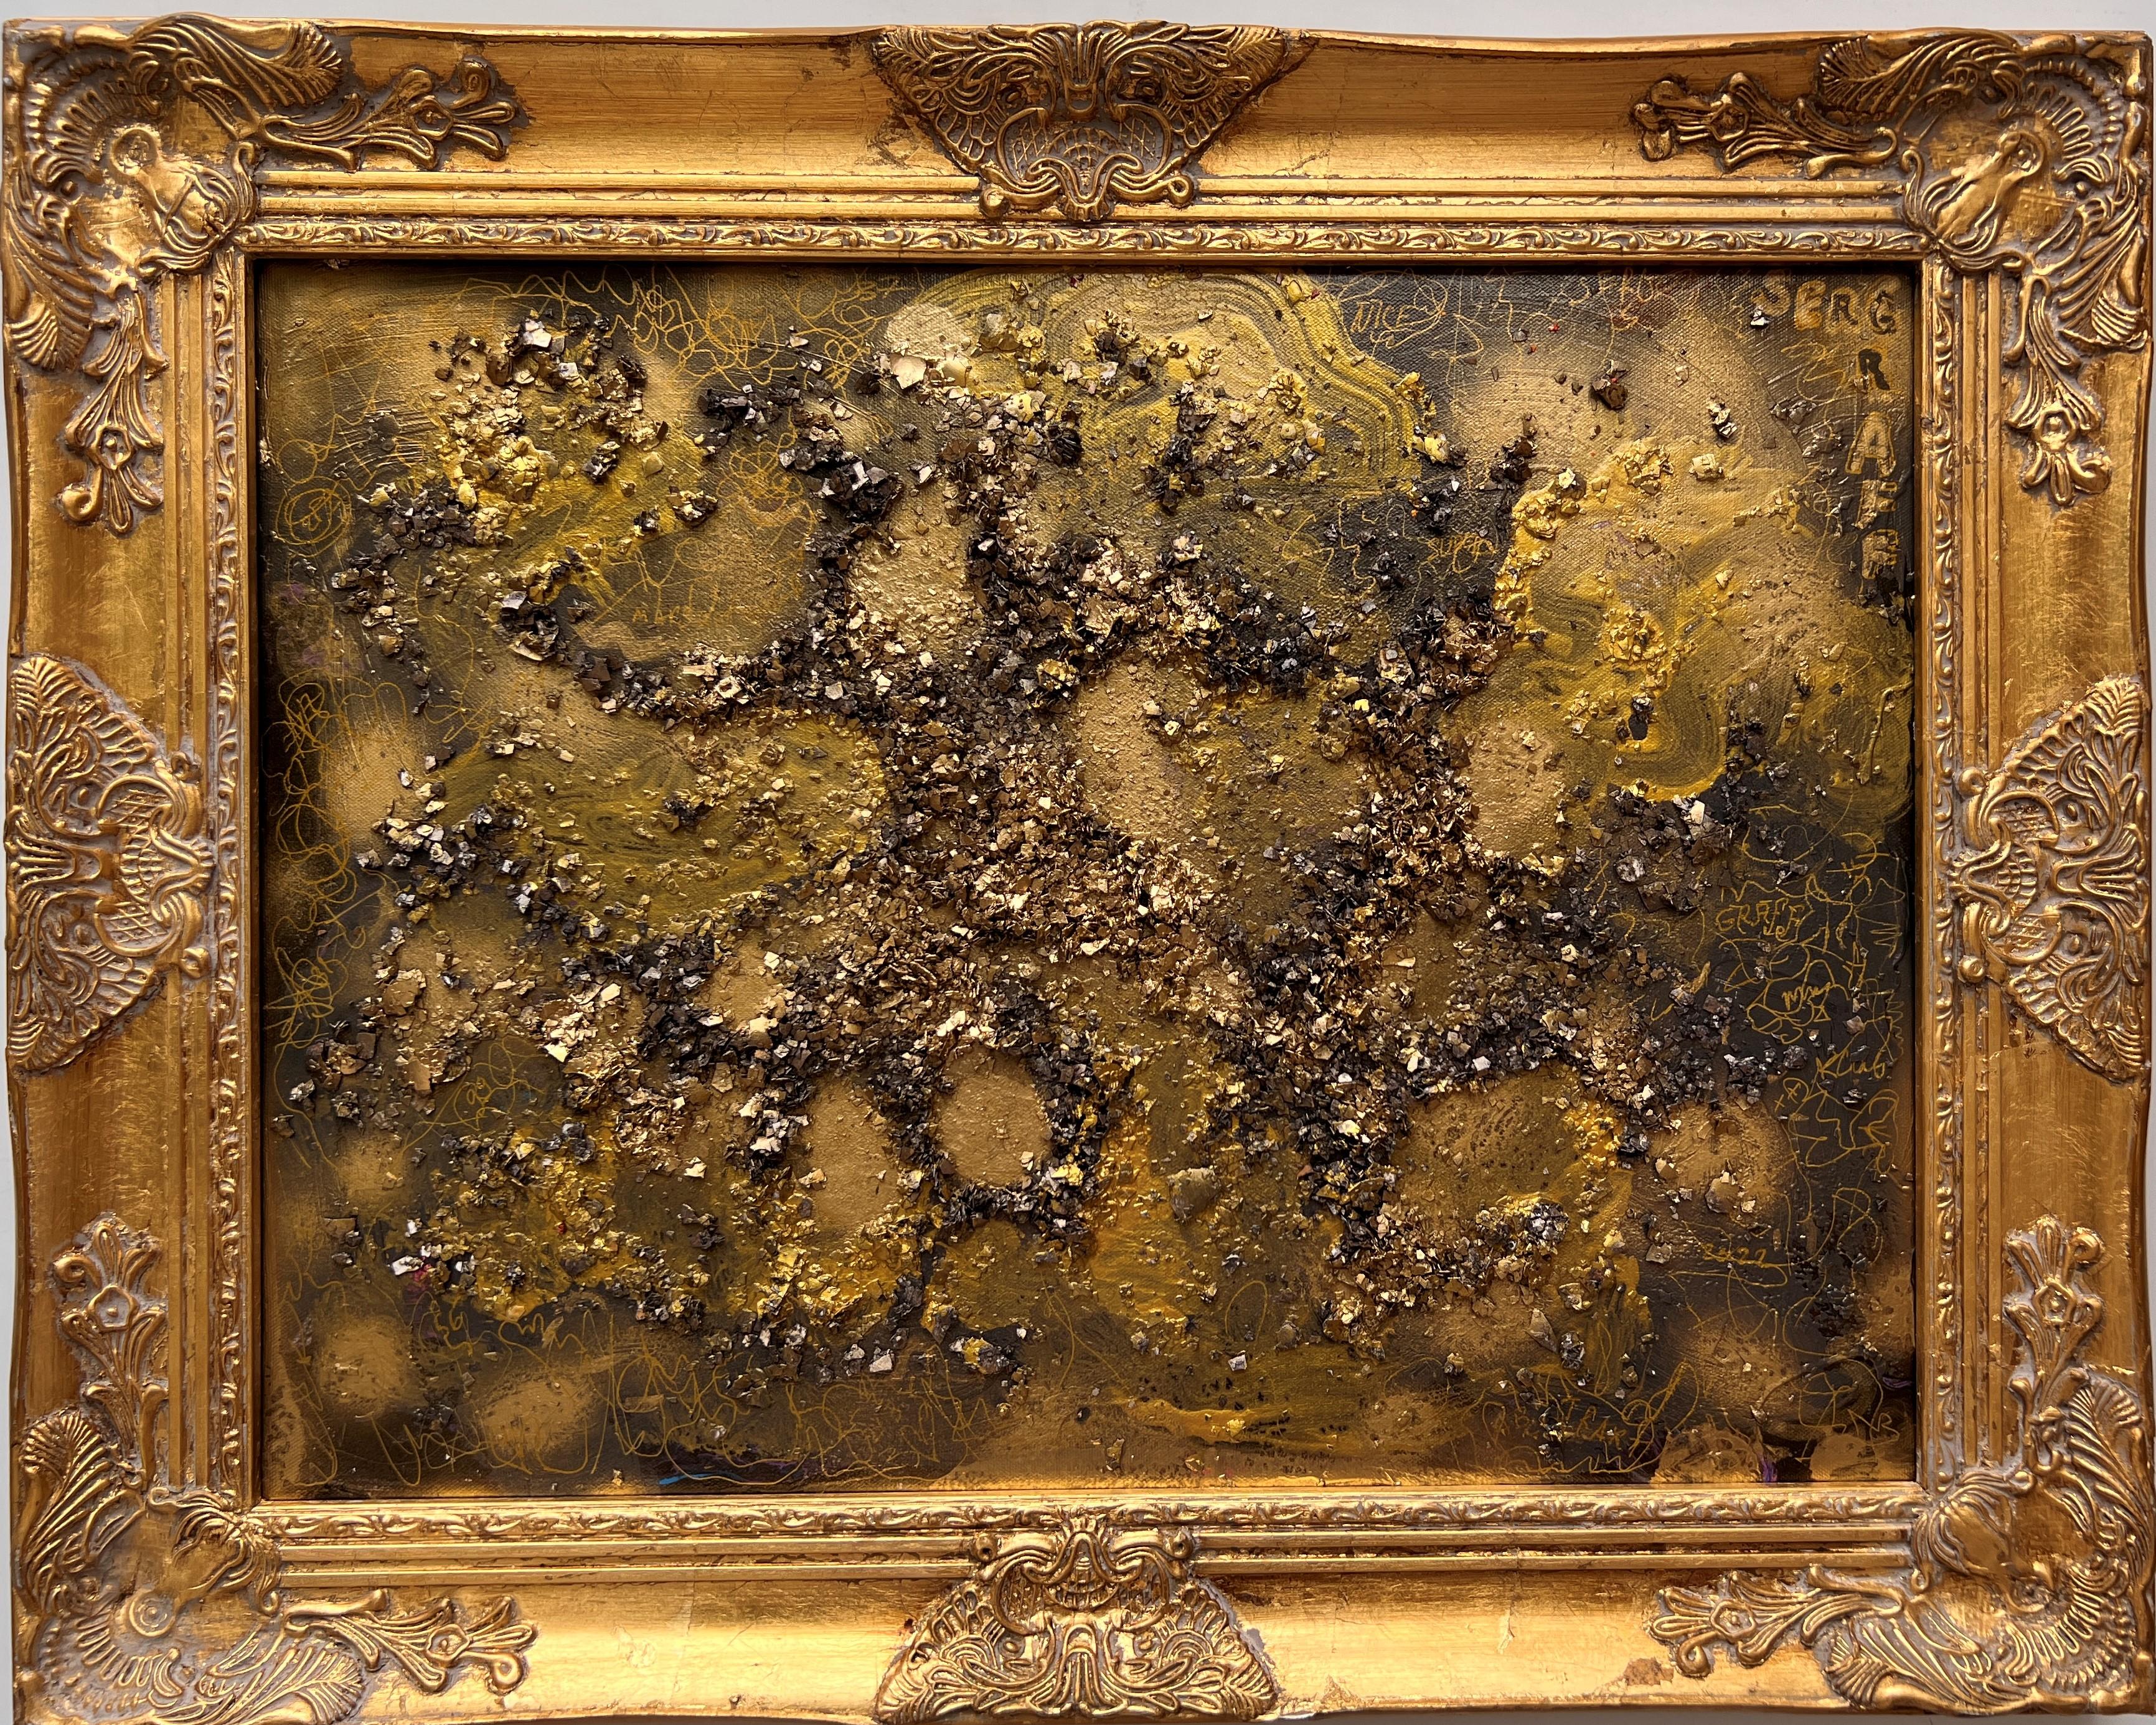 This is a unique original acrylic painting on canvas in a fantasy abstract style by Serg Graff Titled "Gold for you". Textured mixed media makes this picture 3D and expressive. 
 
It comes signed, dated, and with a COA (Certificate of Authenticity).